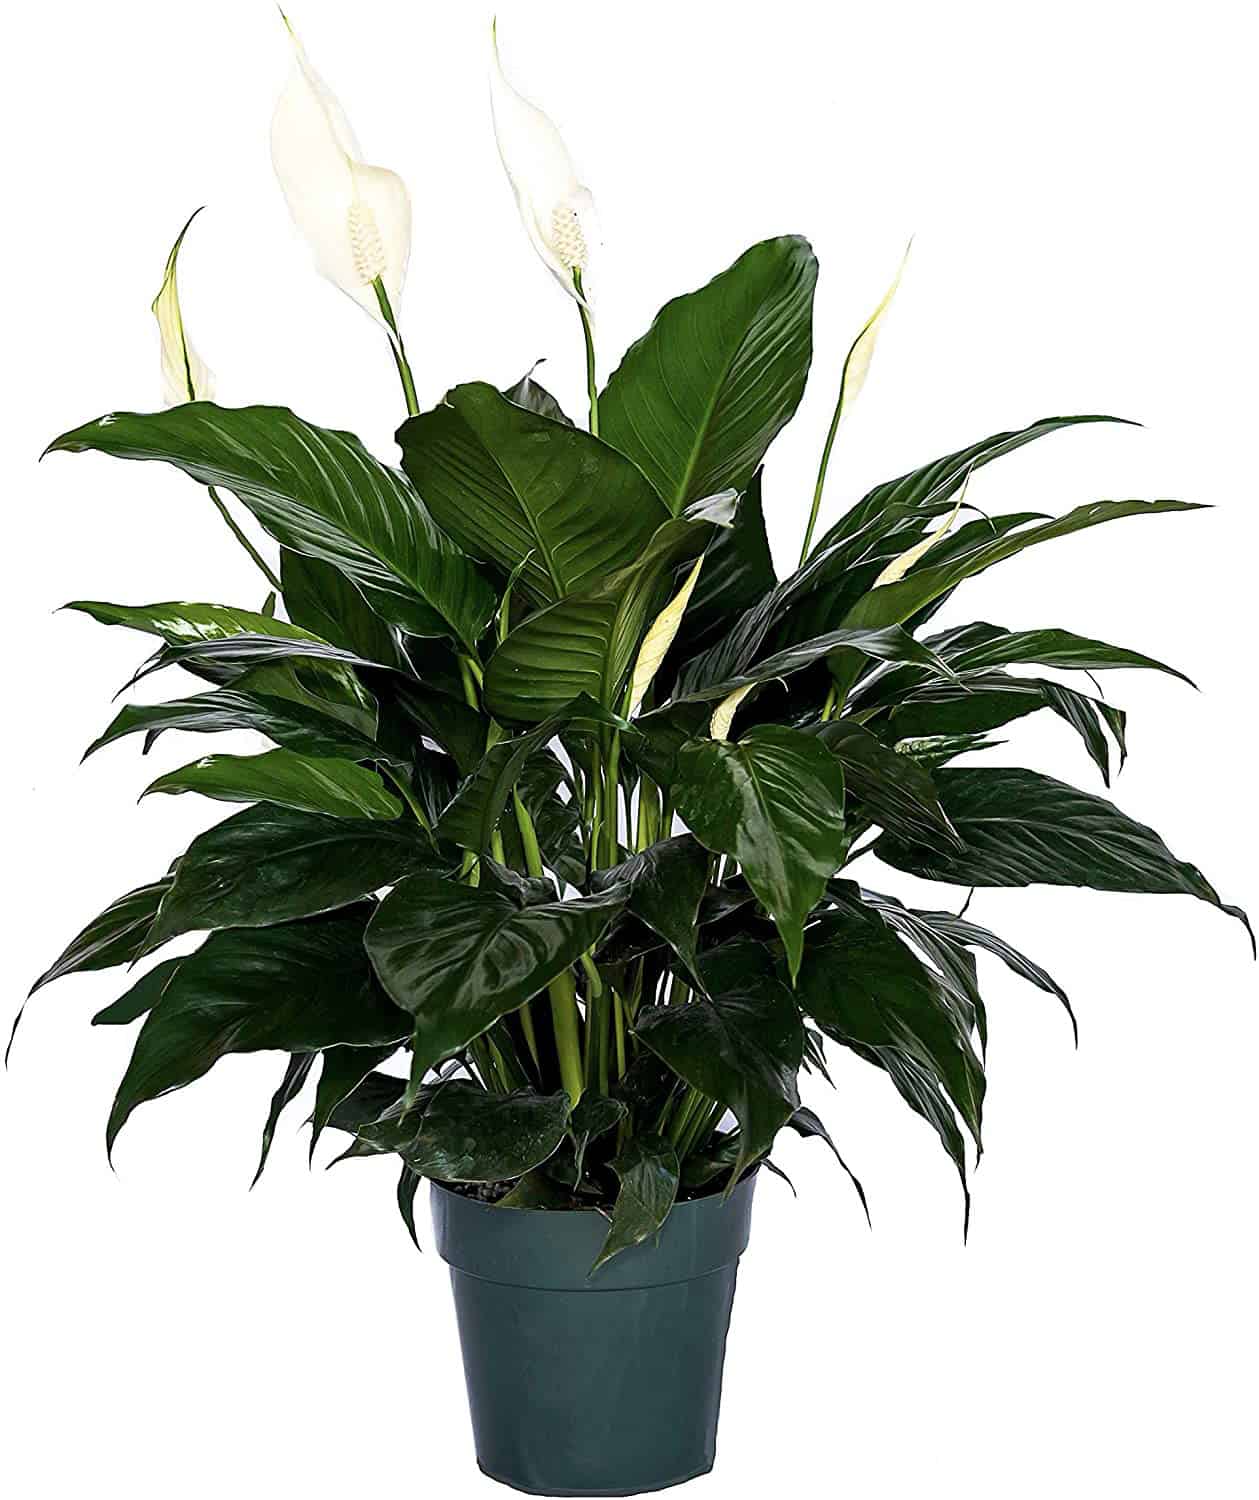 peace lily houseplant that cleans the air